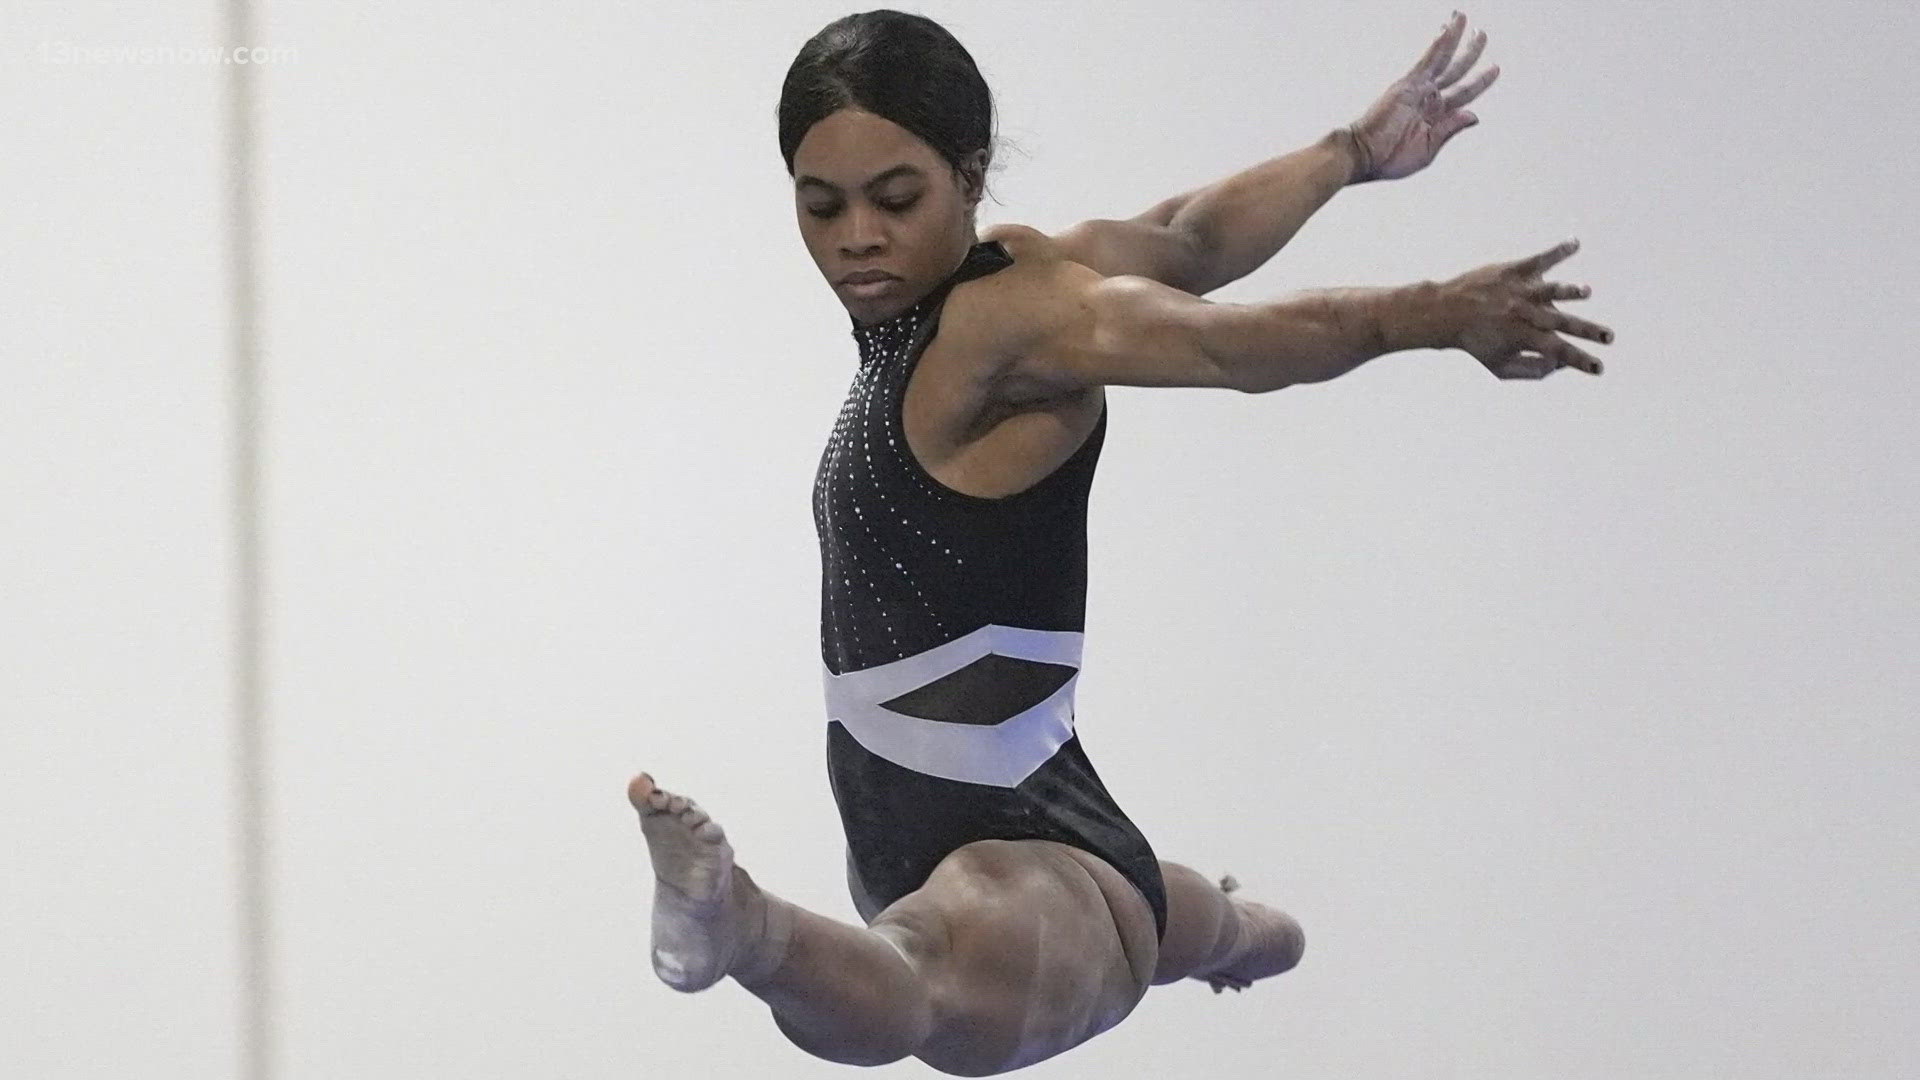 The 2012 Olympic gymnastics champion participated in her first competition at the American Classic since the 2016 Olympics.